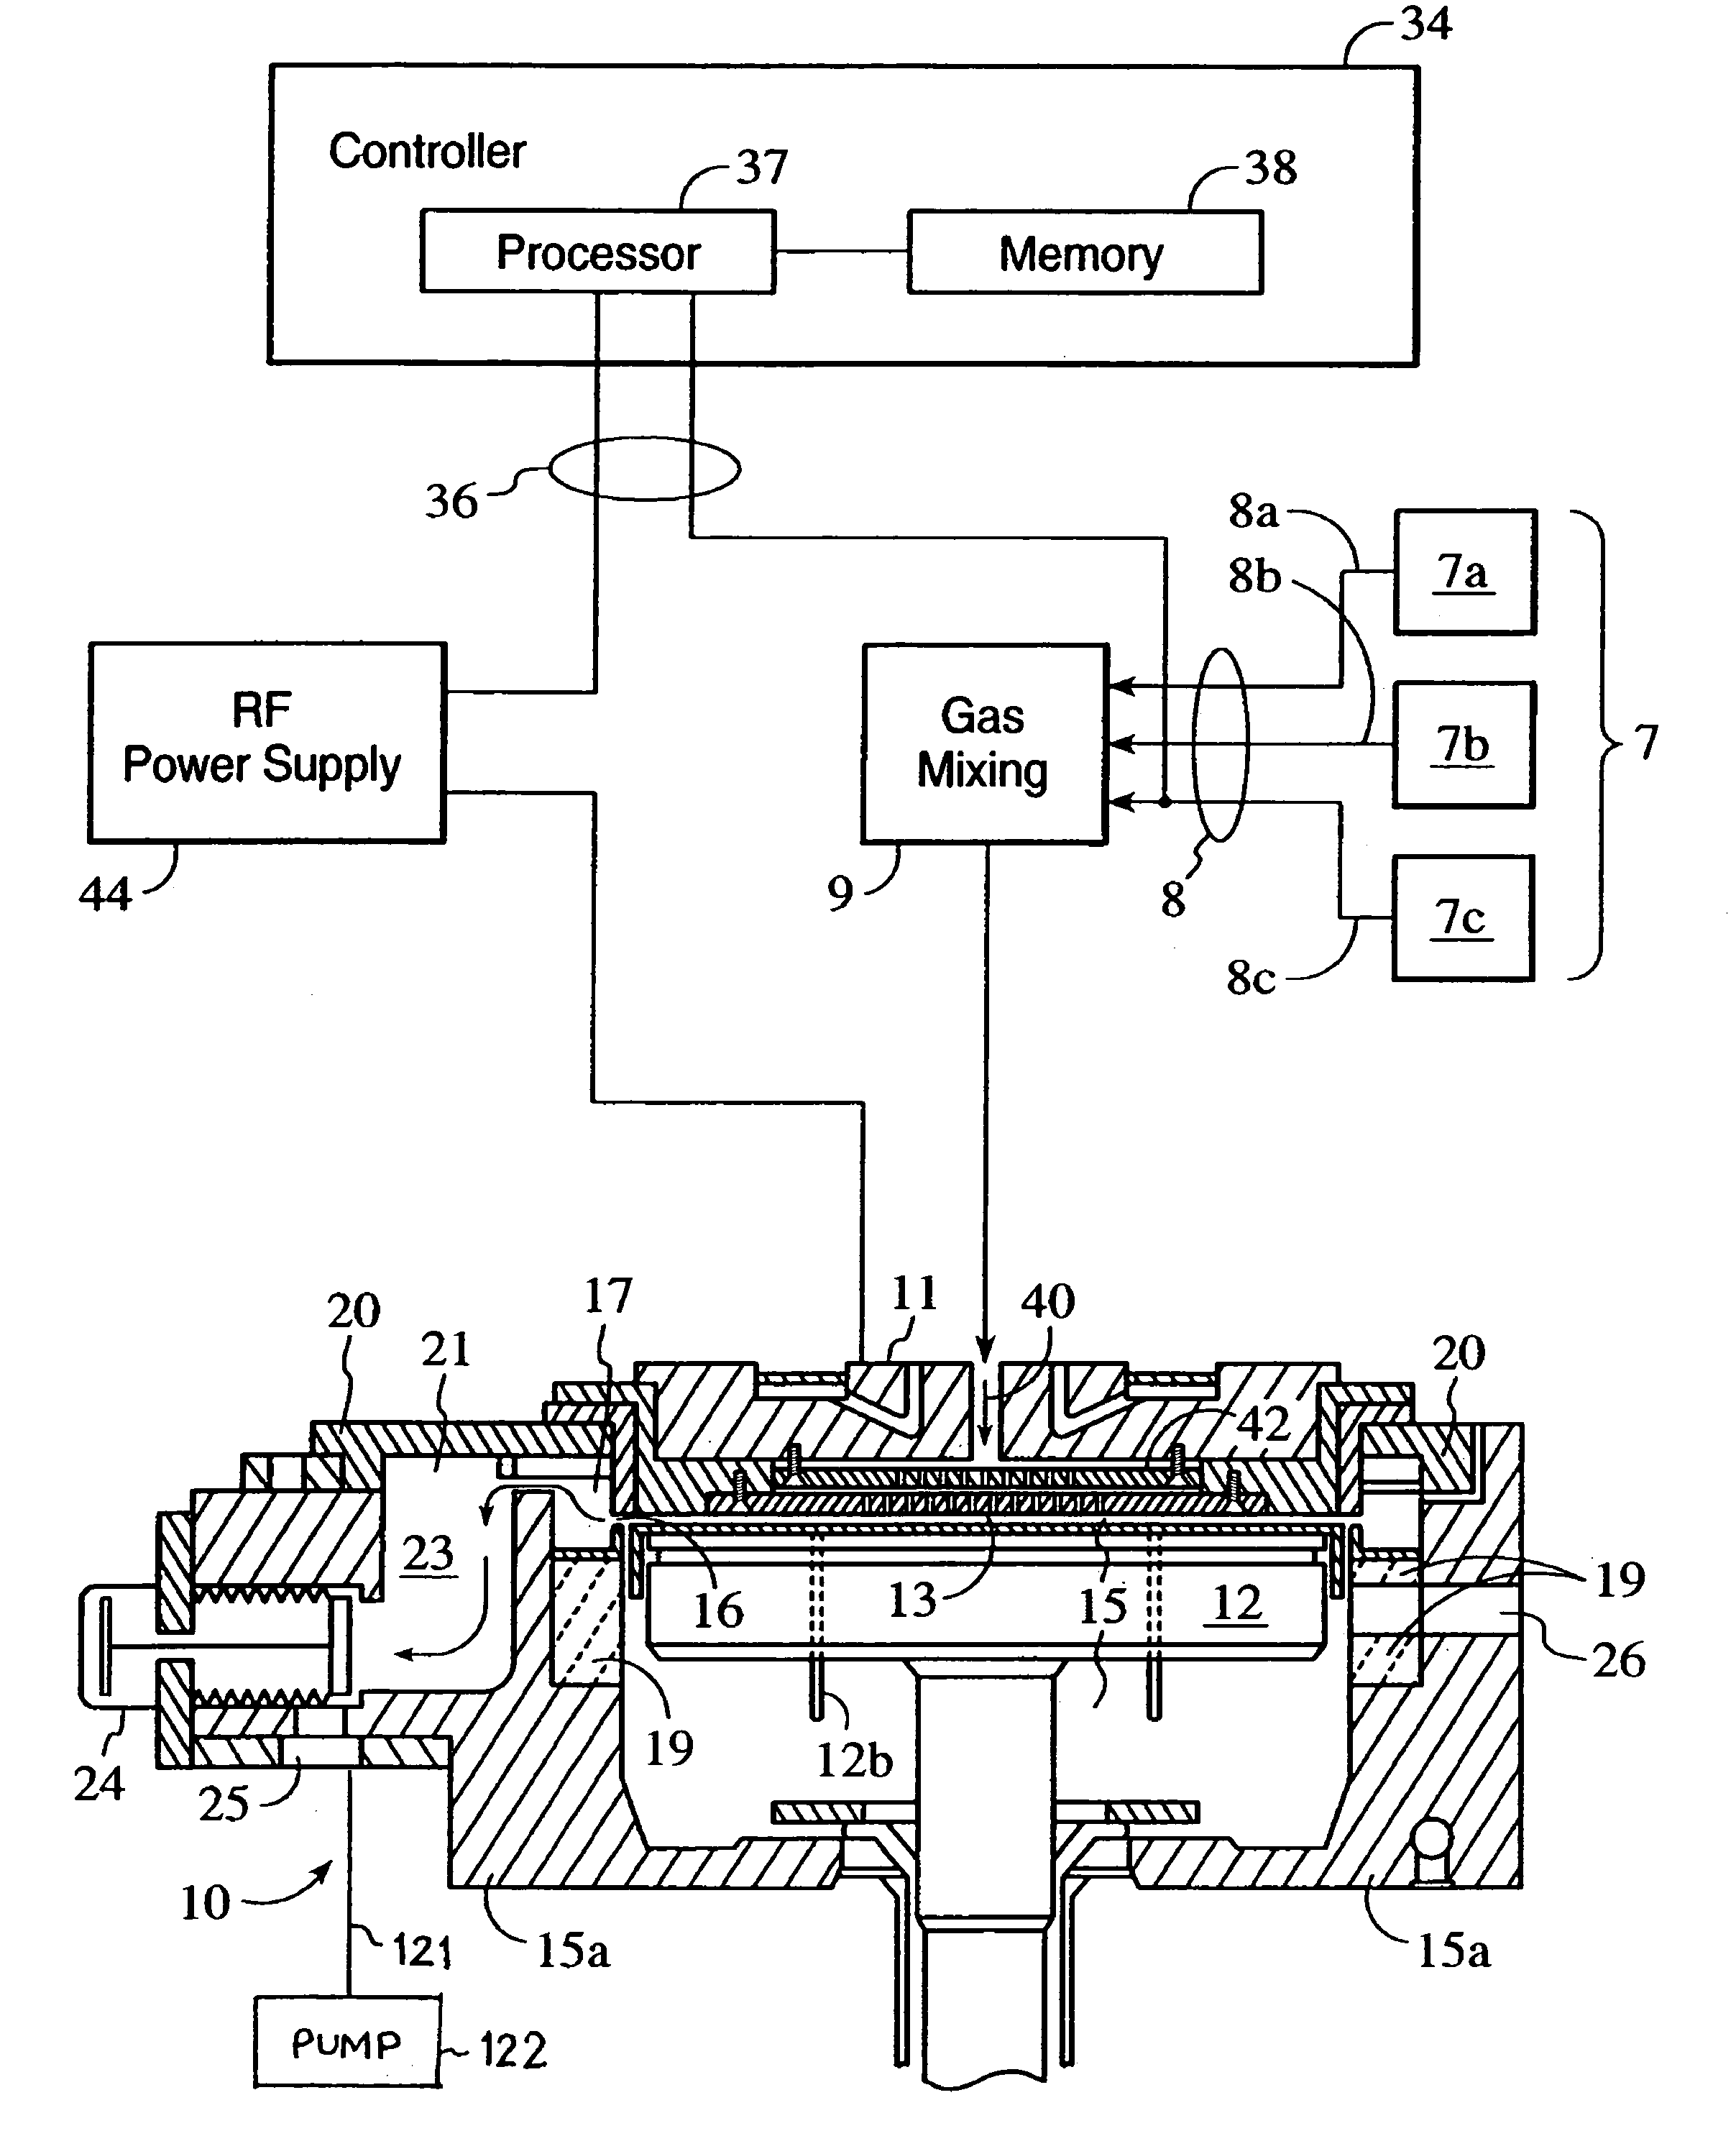 Remote plasma cleaning source having reduced reactivity with a substrate processing chamber